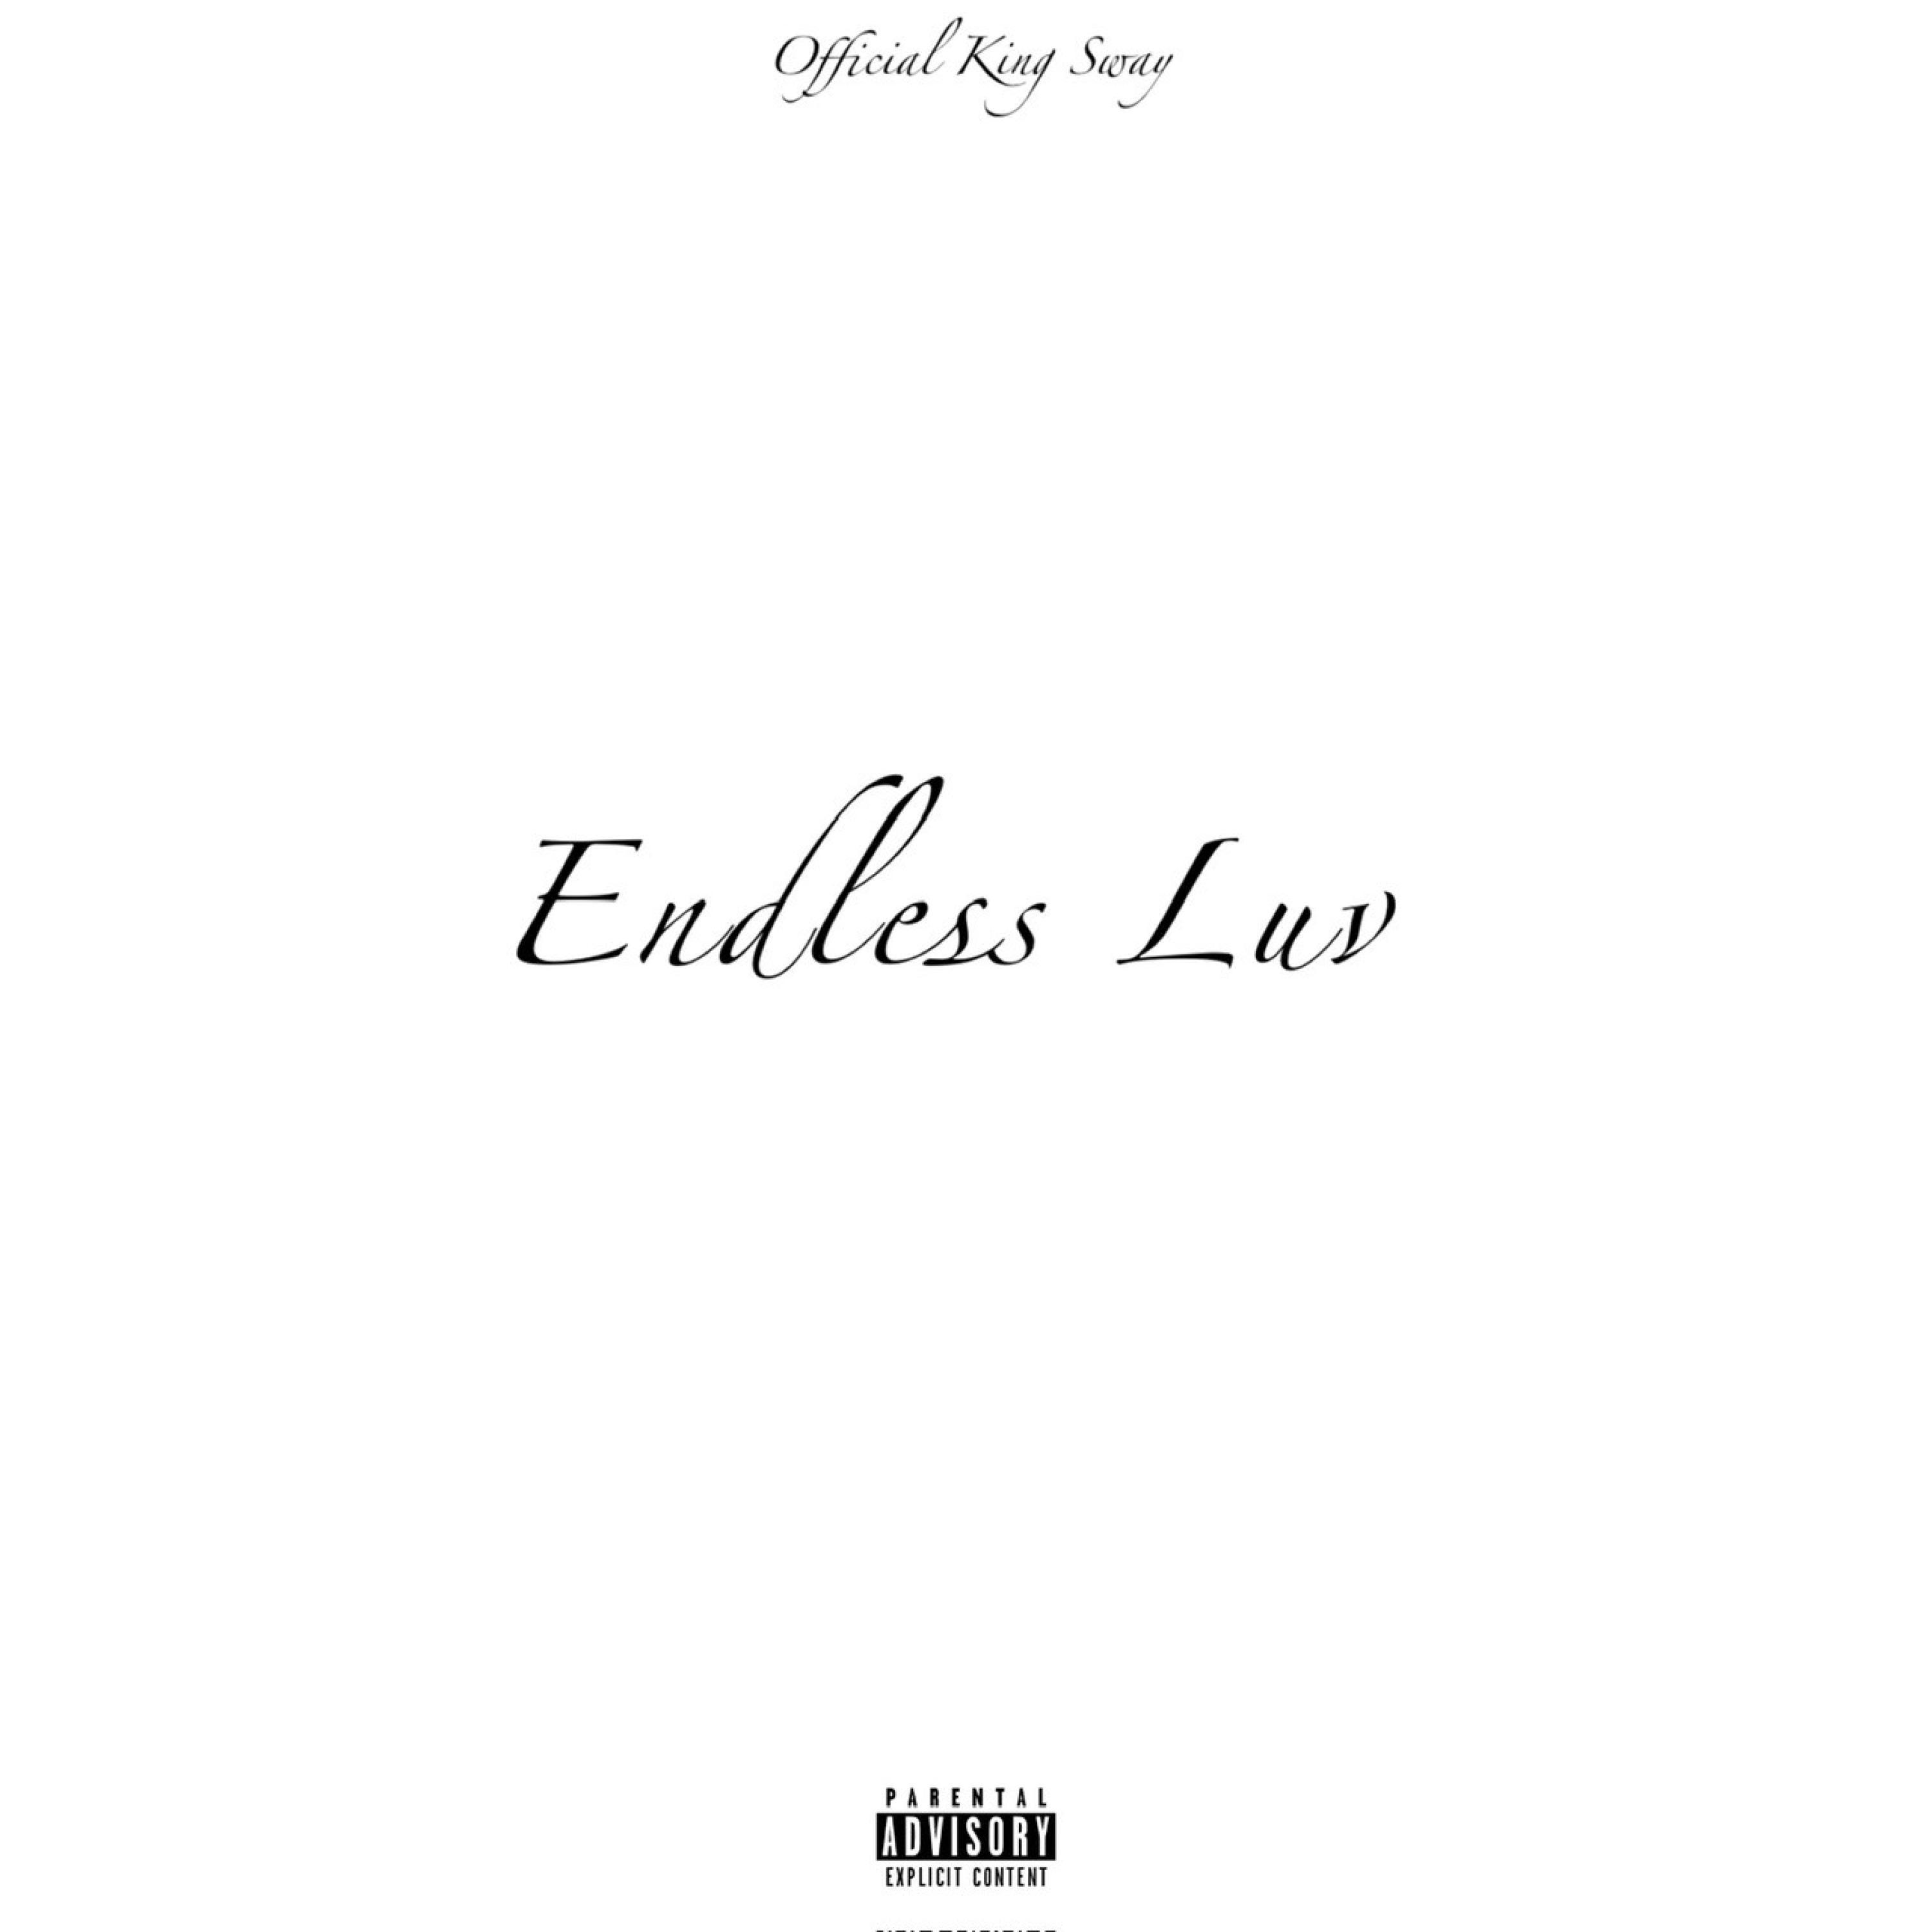 Official King Sway - Ruthless